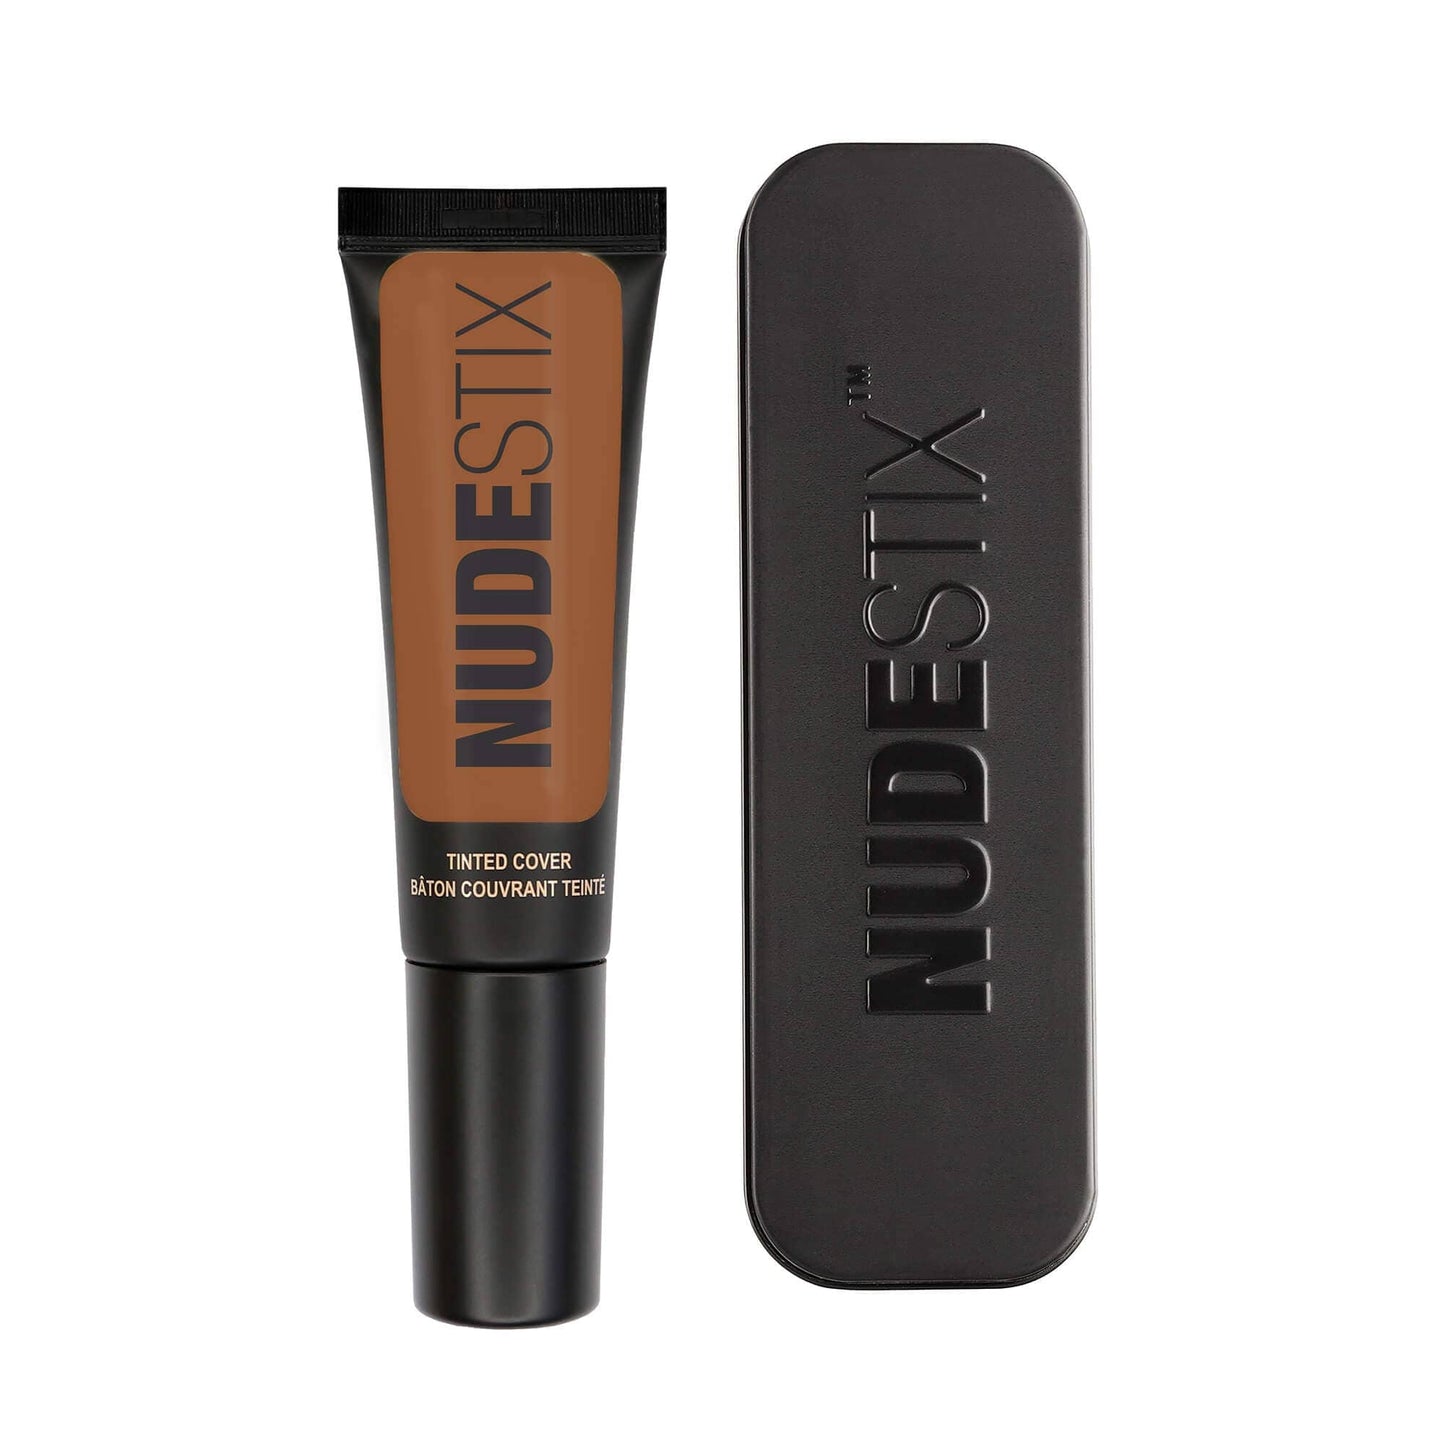 Tinted Cover Liquid Foundation nude 10 and Nudestix can